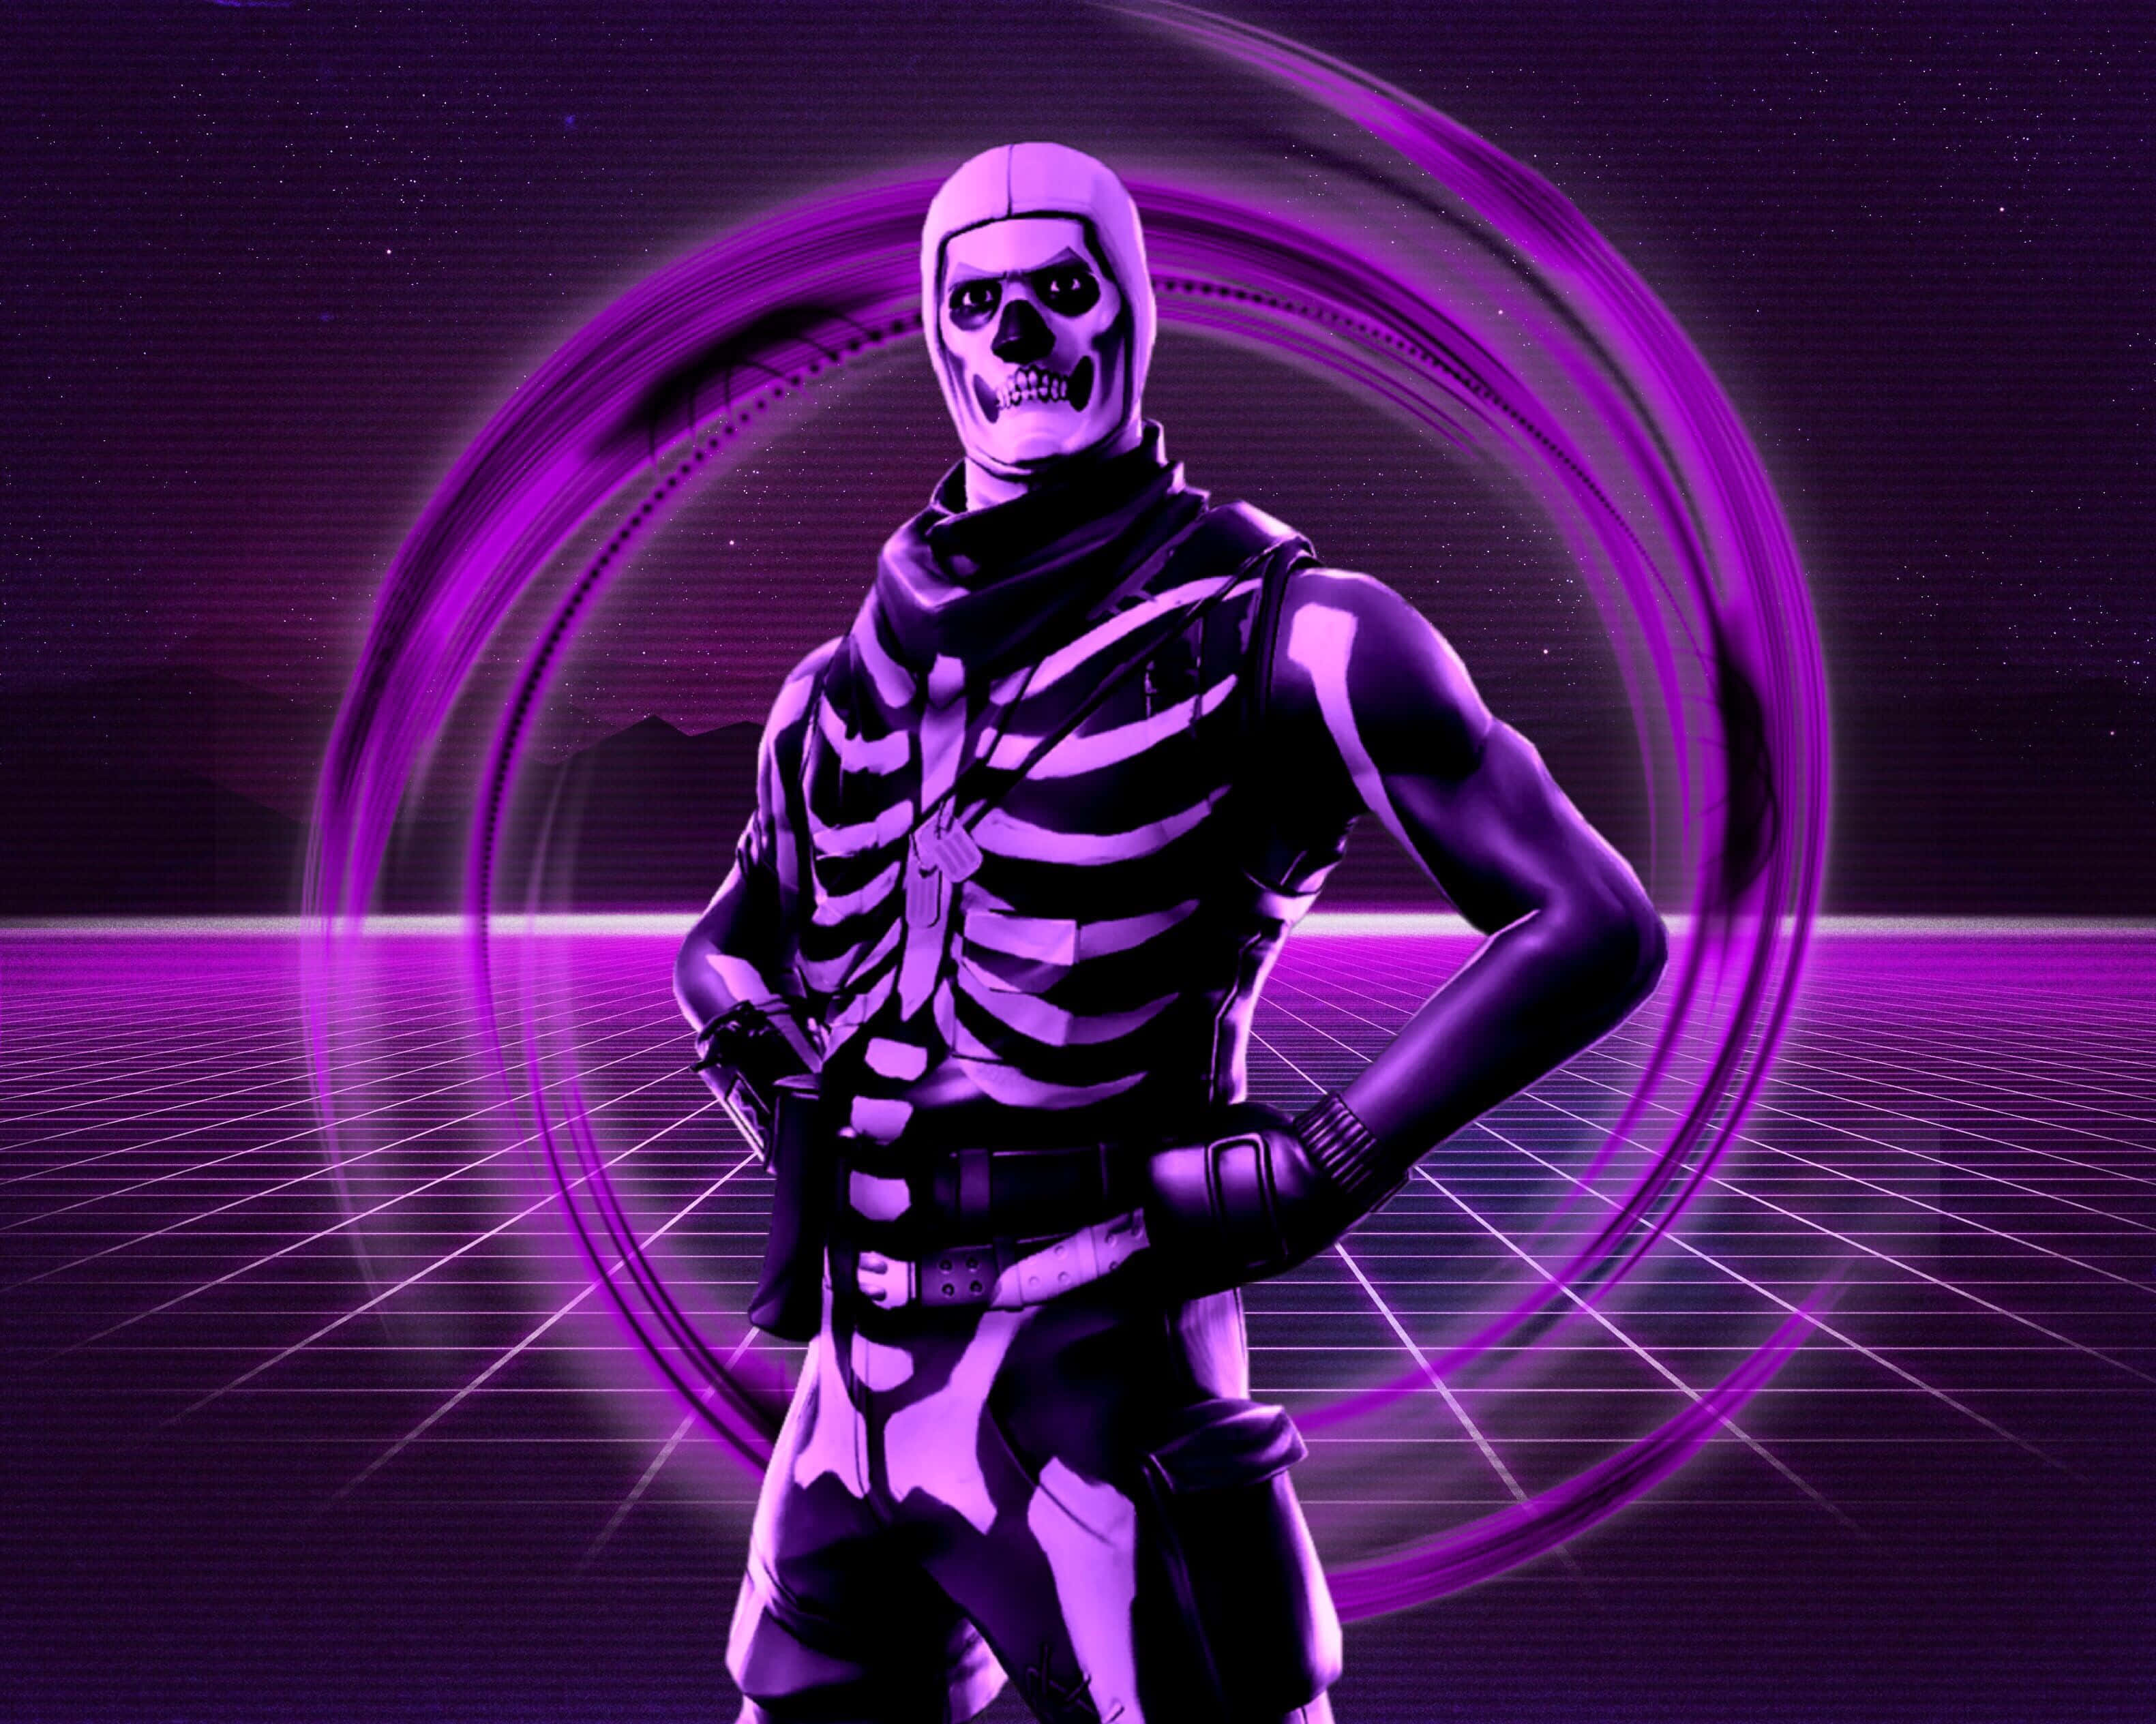 ‘Match your style with the iconic Purple Skull Trooper’ Wallpaper